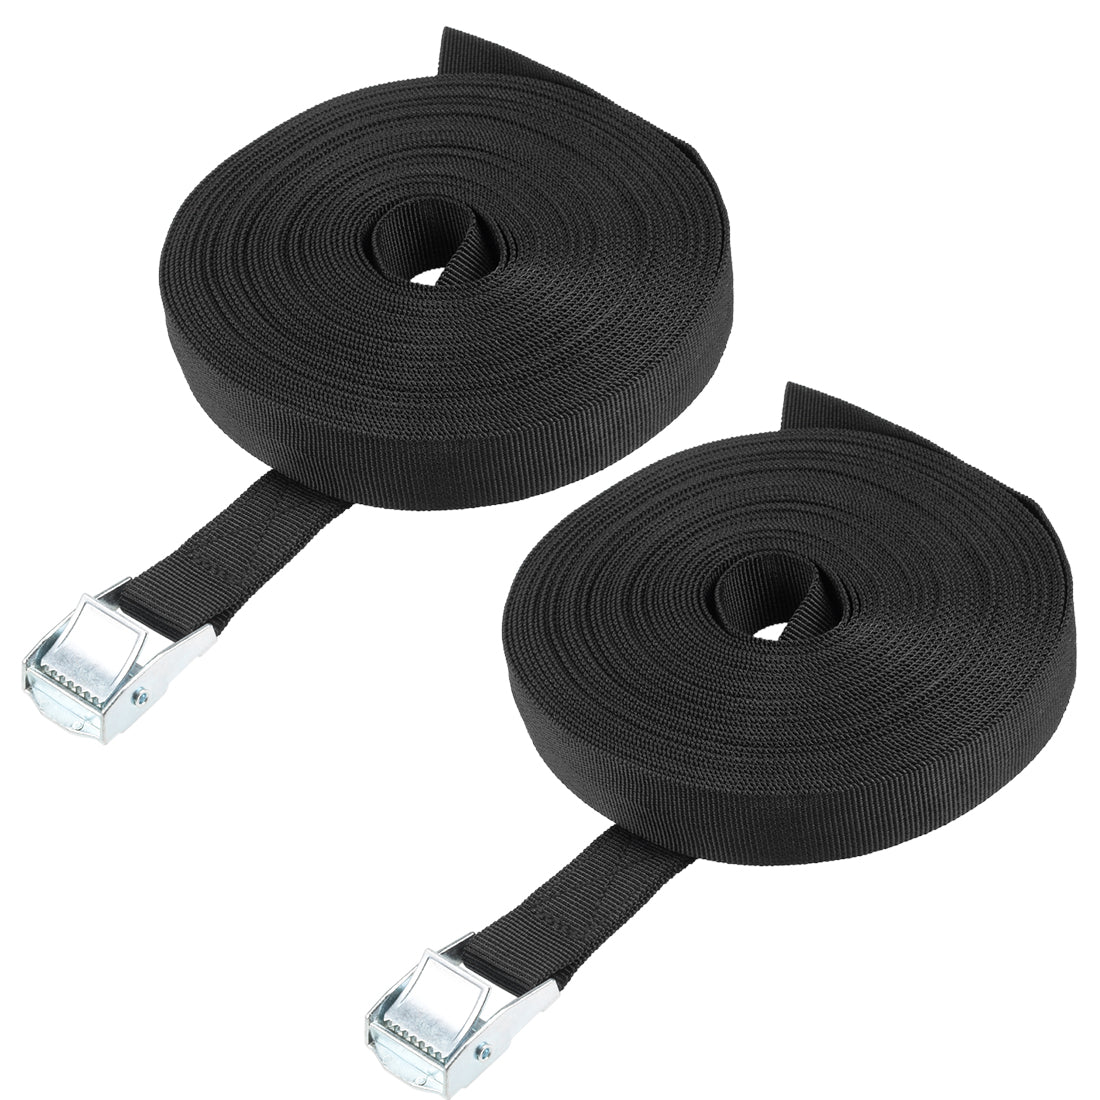 uxcell Uxcell 12M x 25mm Lashing Strap Cargo Tie Down Straps Buckle Up to 80Kg, Black, 2Pcs